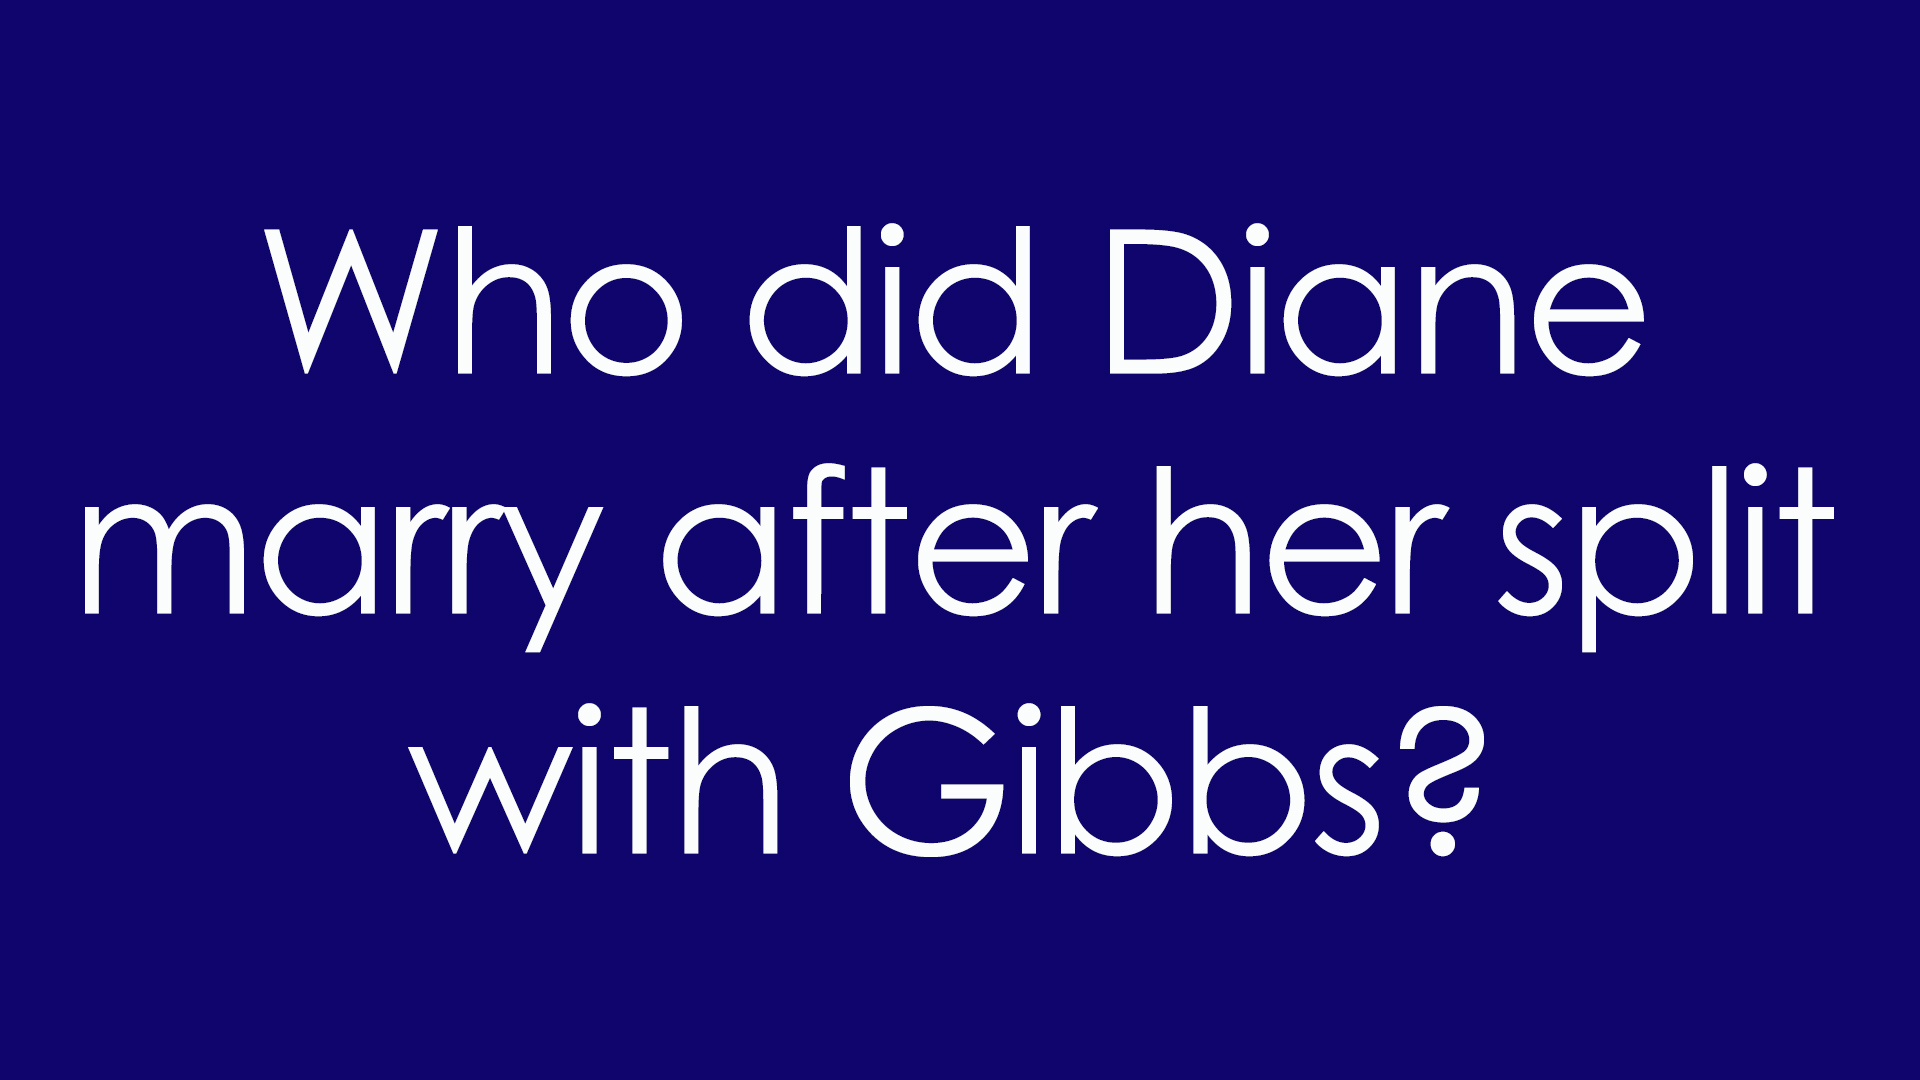 5. Who did Diane marry after her split with Gibbs?